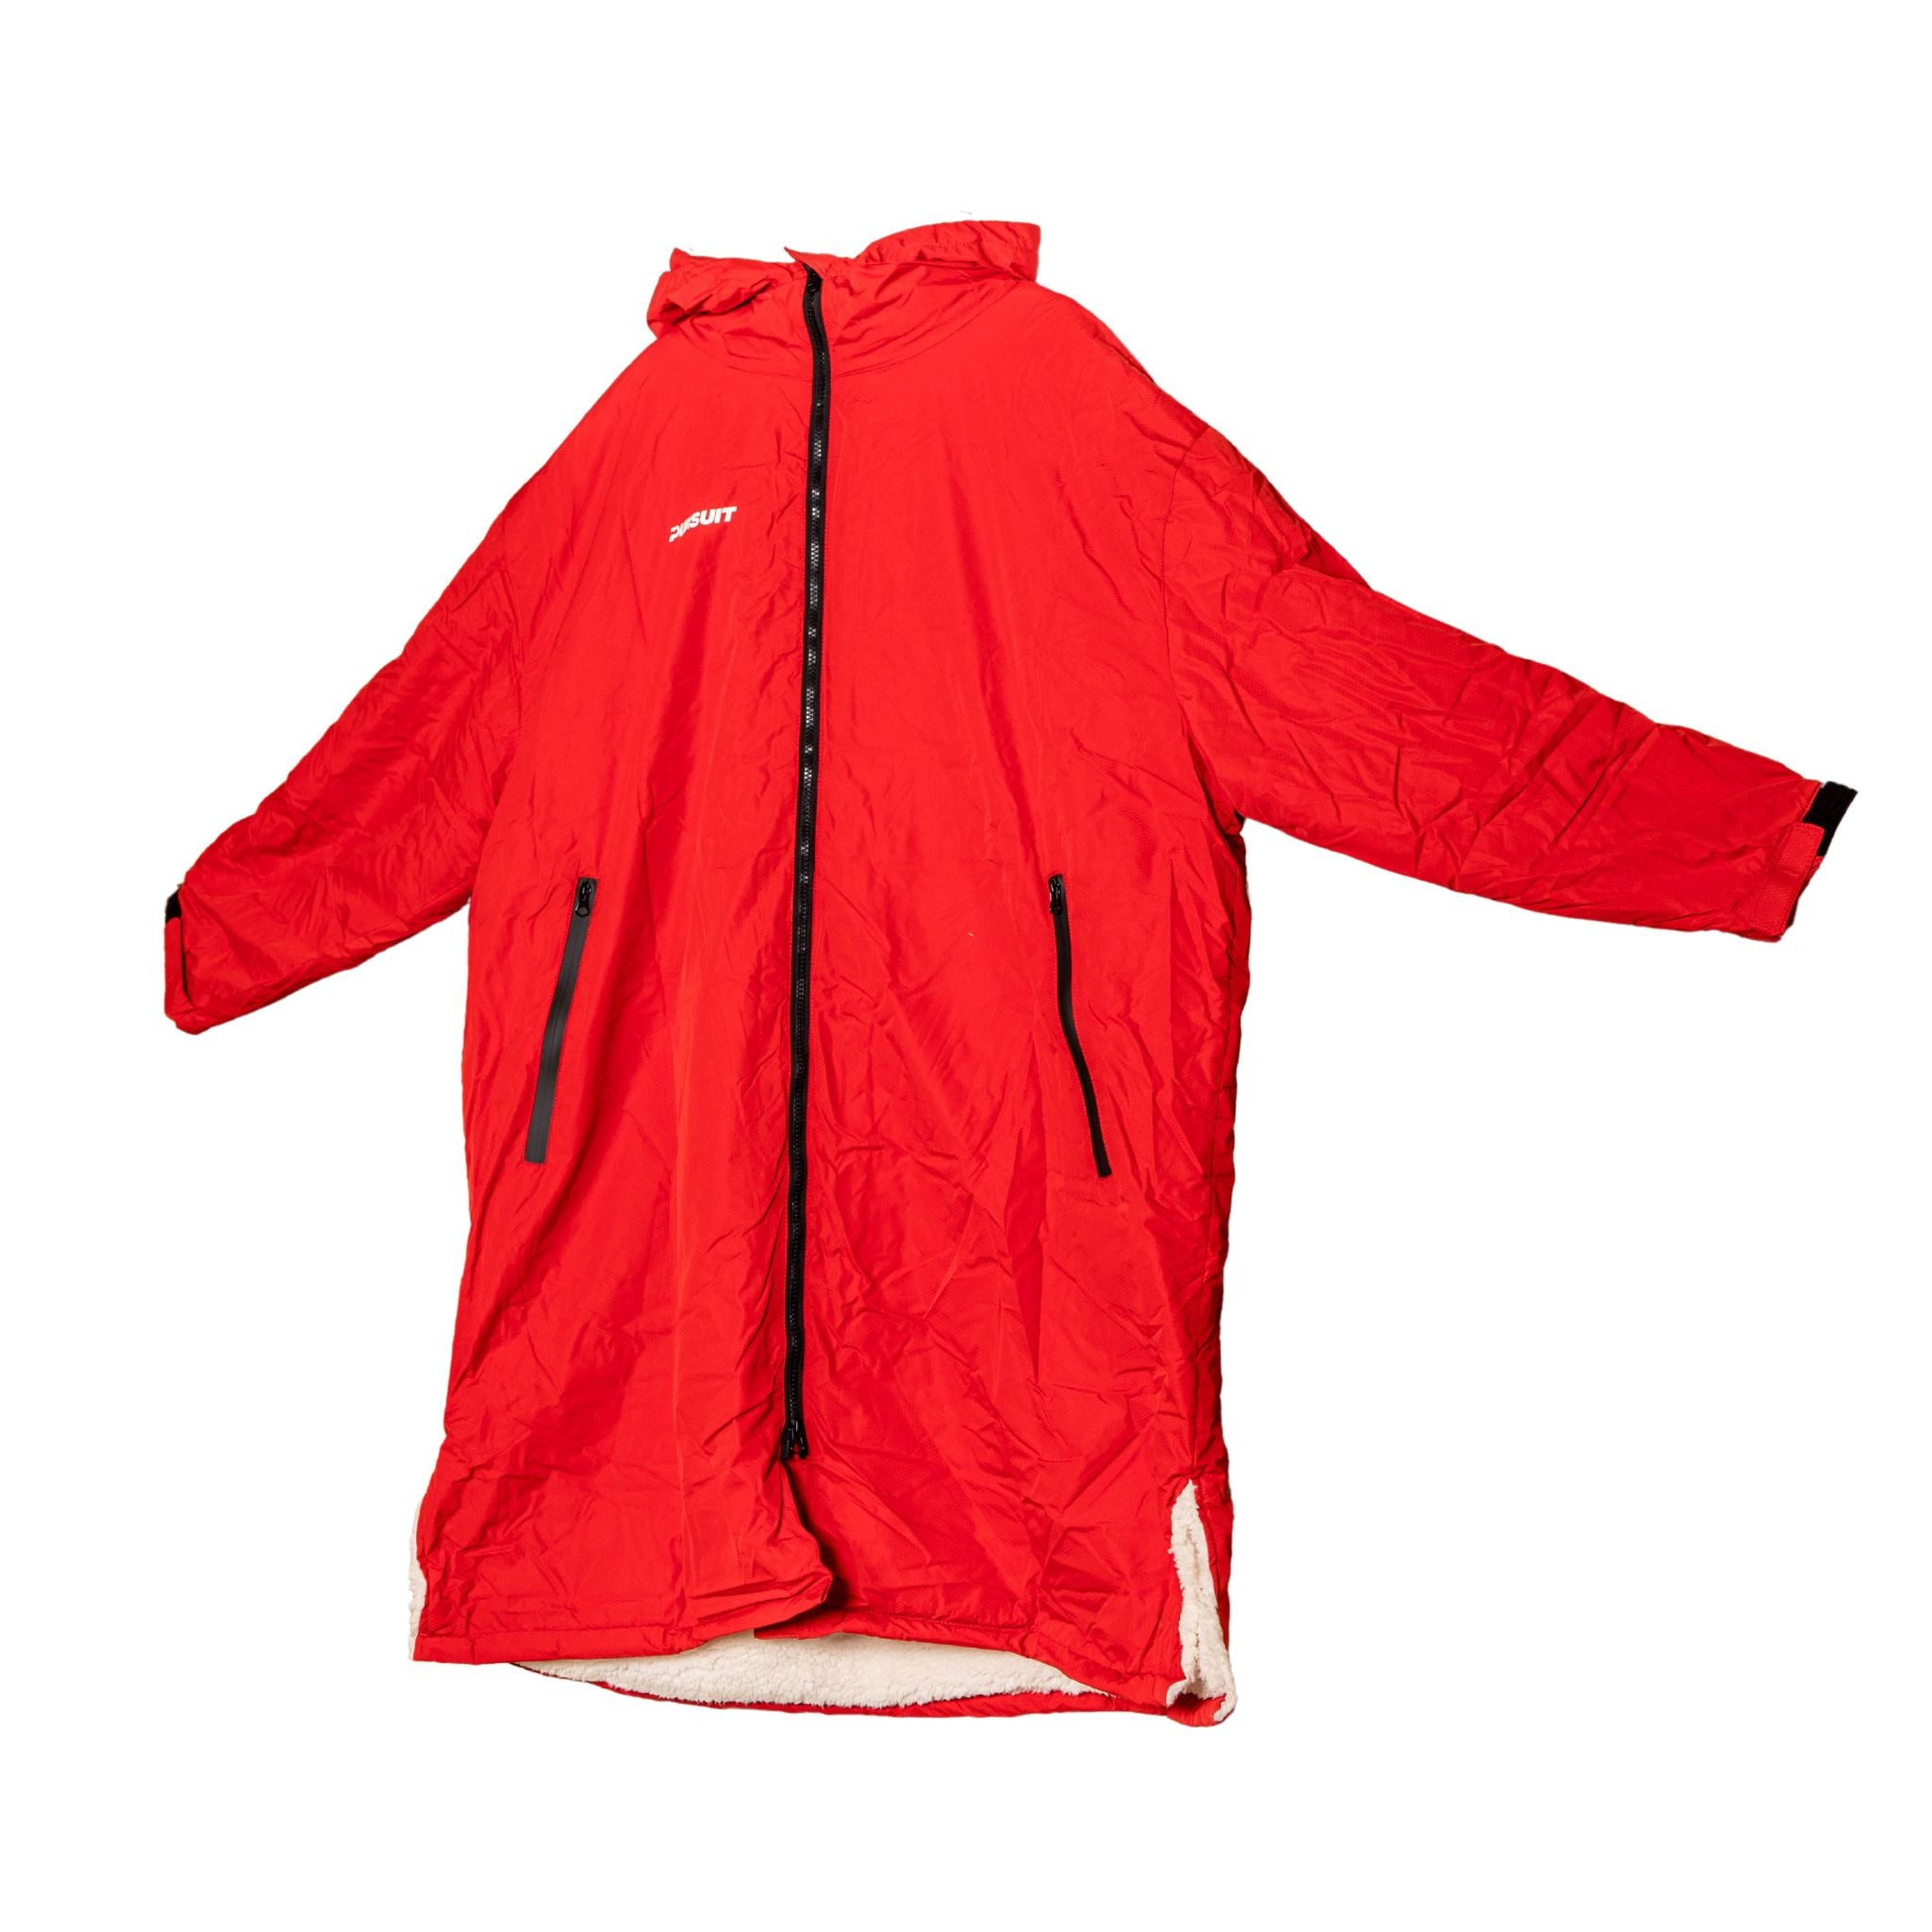 Oversized Adult Waterproof Active Dry Robe with Fleece Lining and Travel Bag in Red